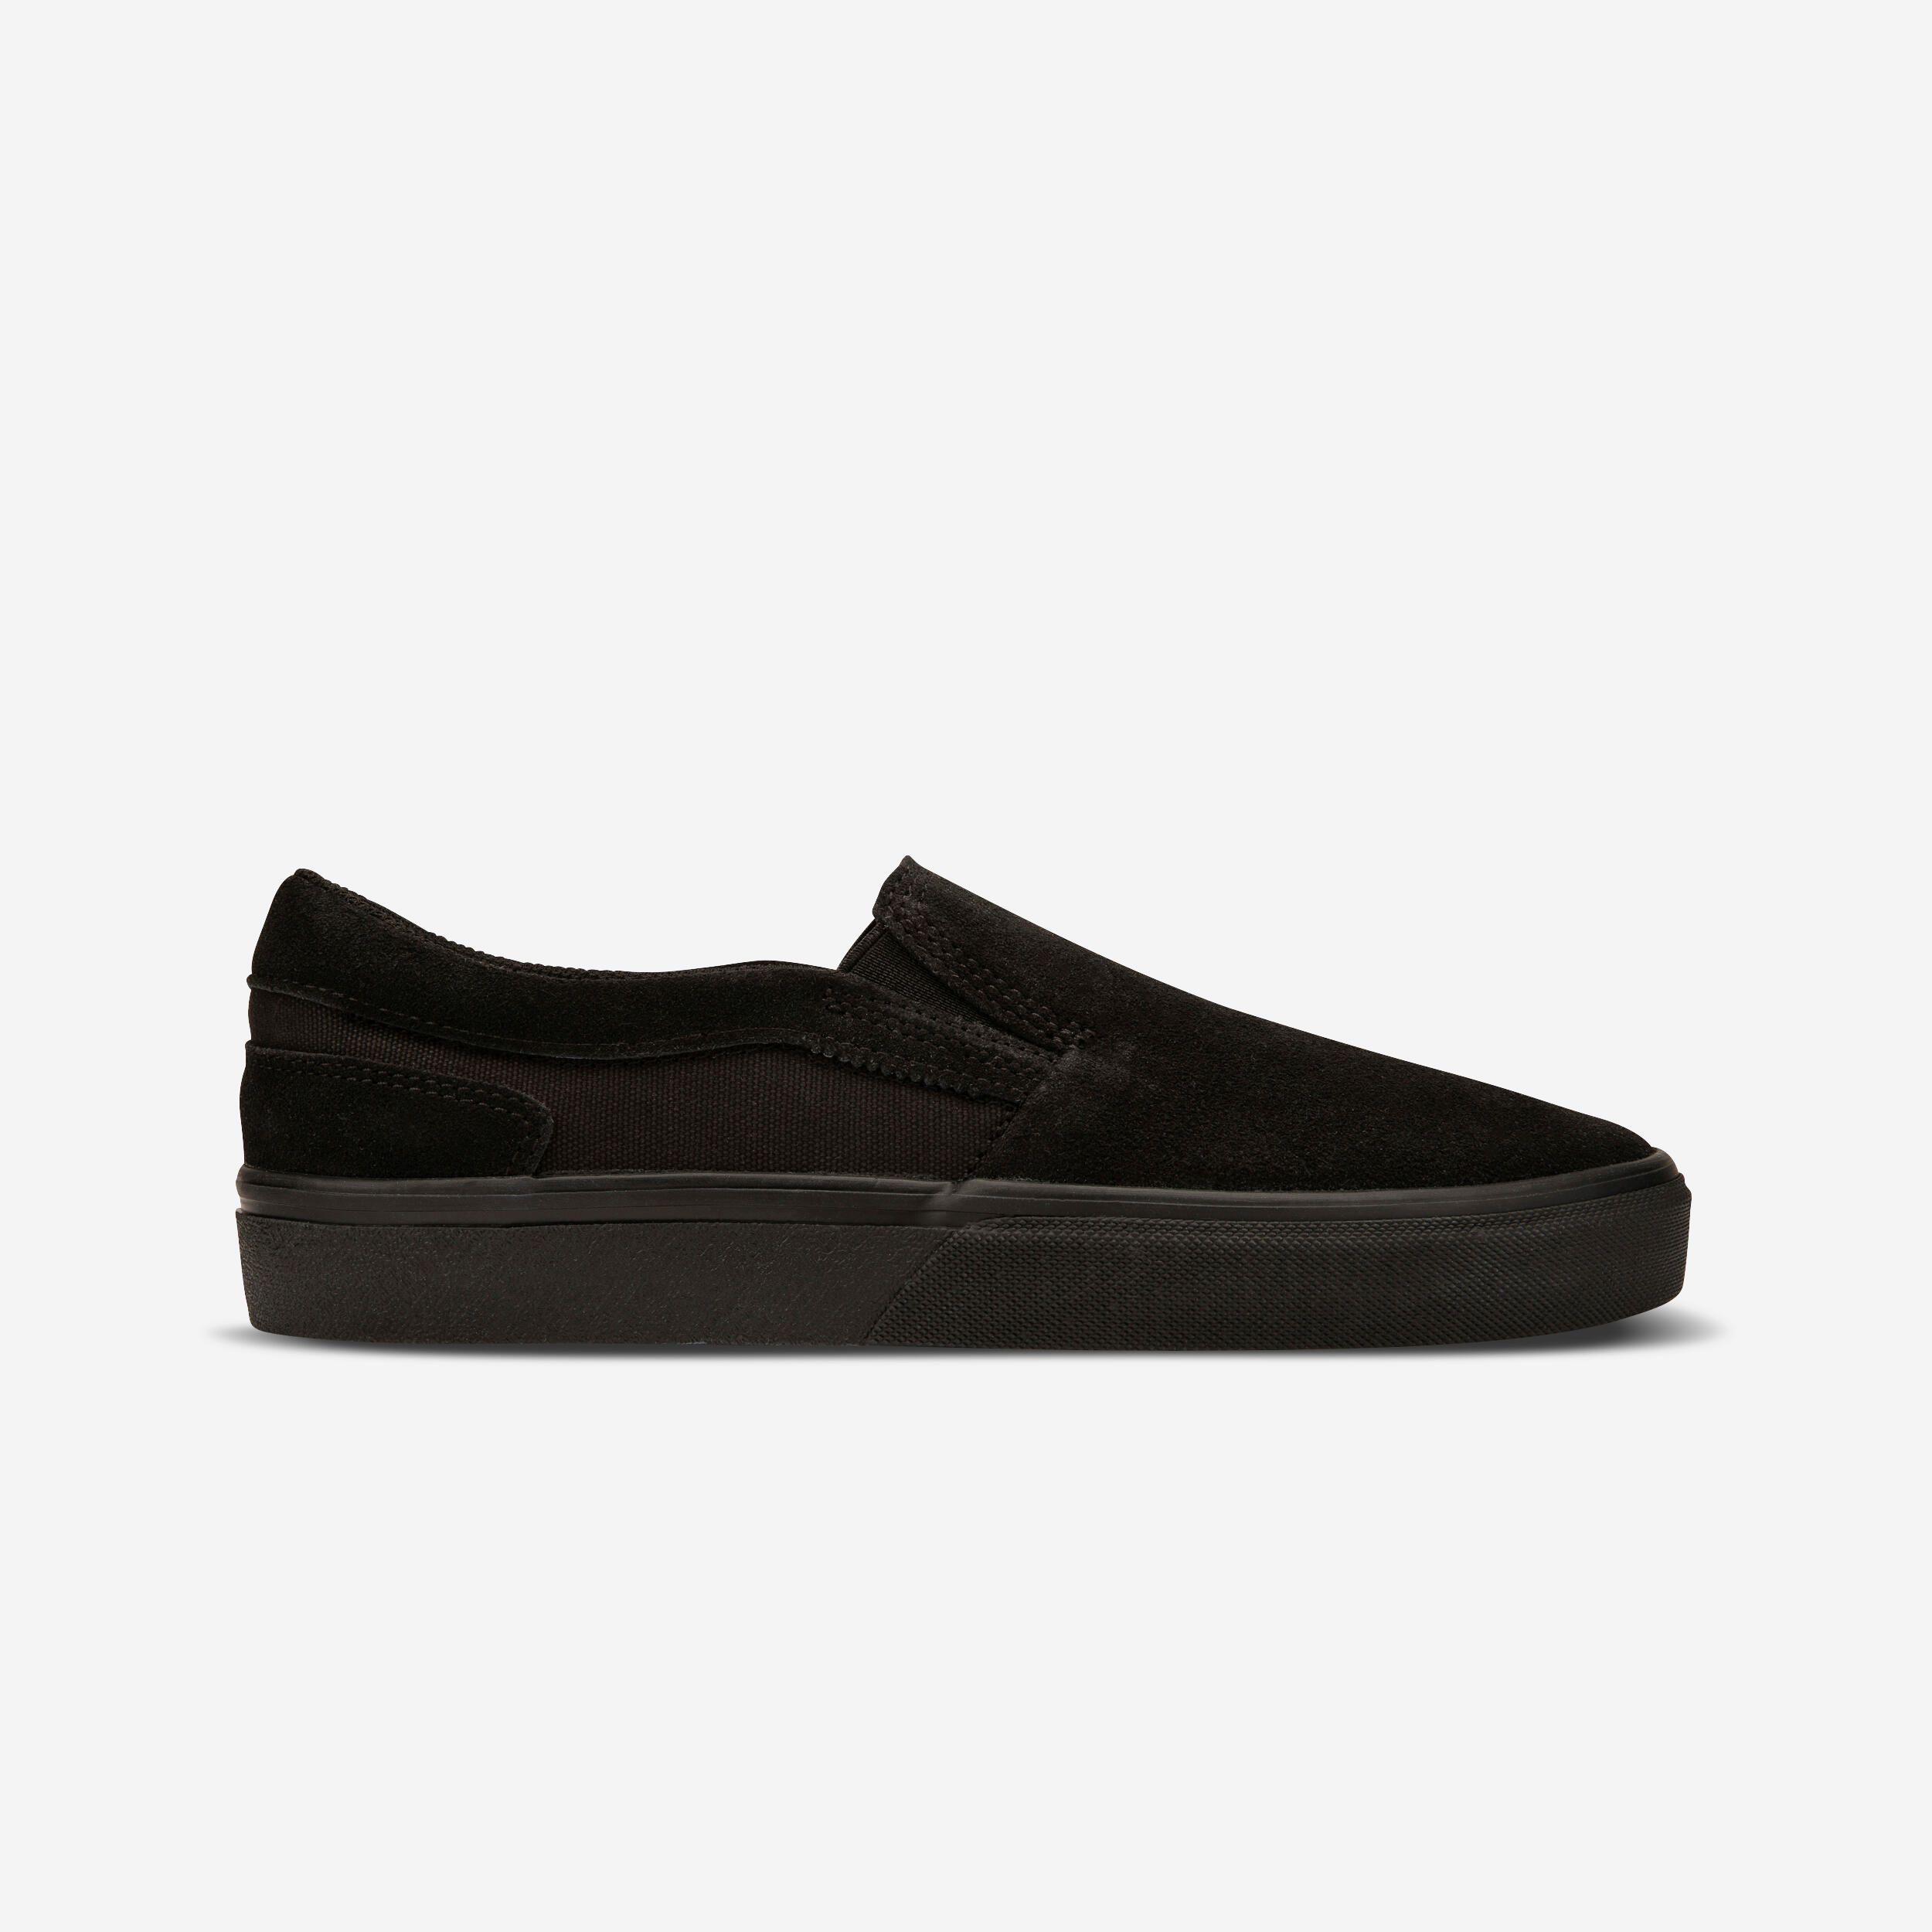 Adult Low-Top Slip-On Skate Shoes Without Laces Vulca 500 - Black 5/19